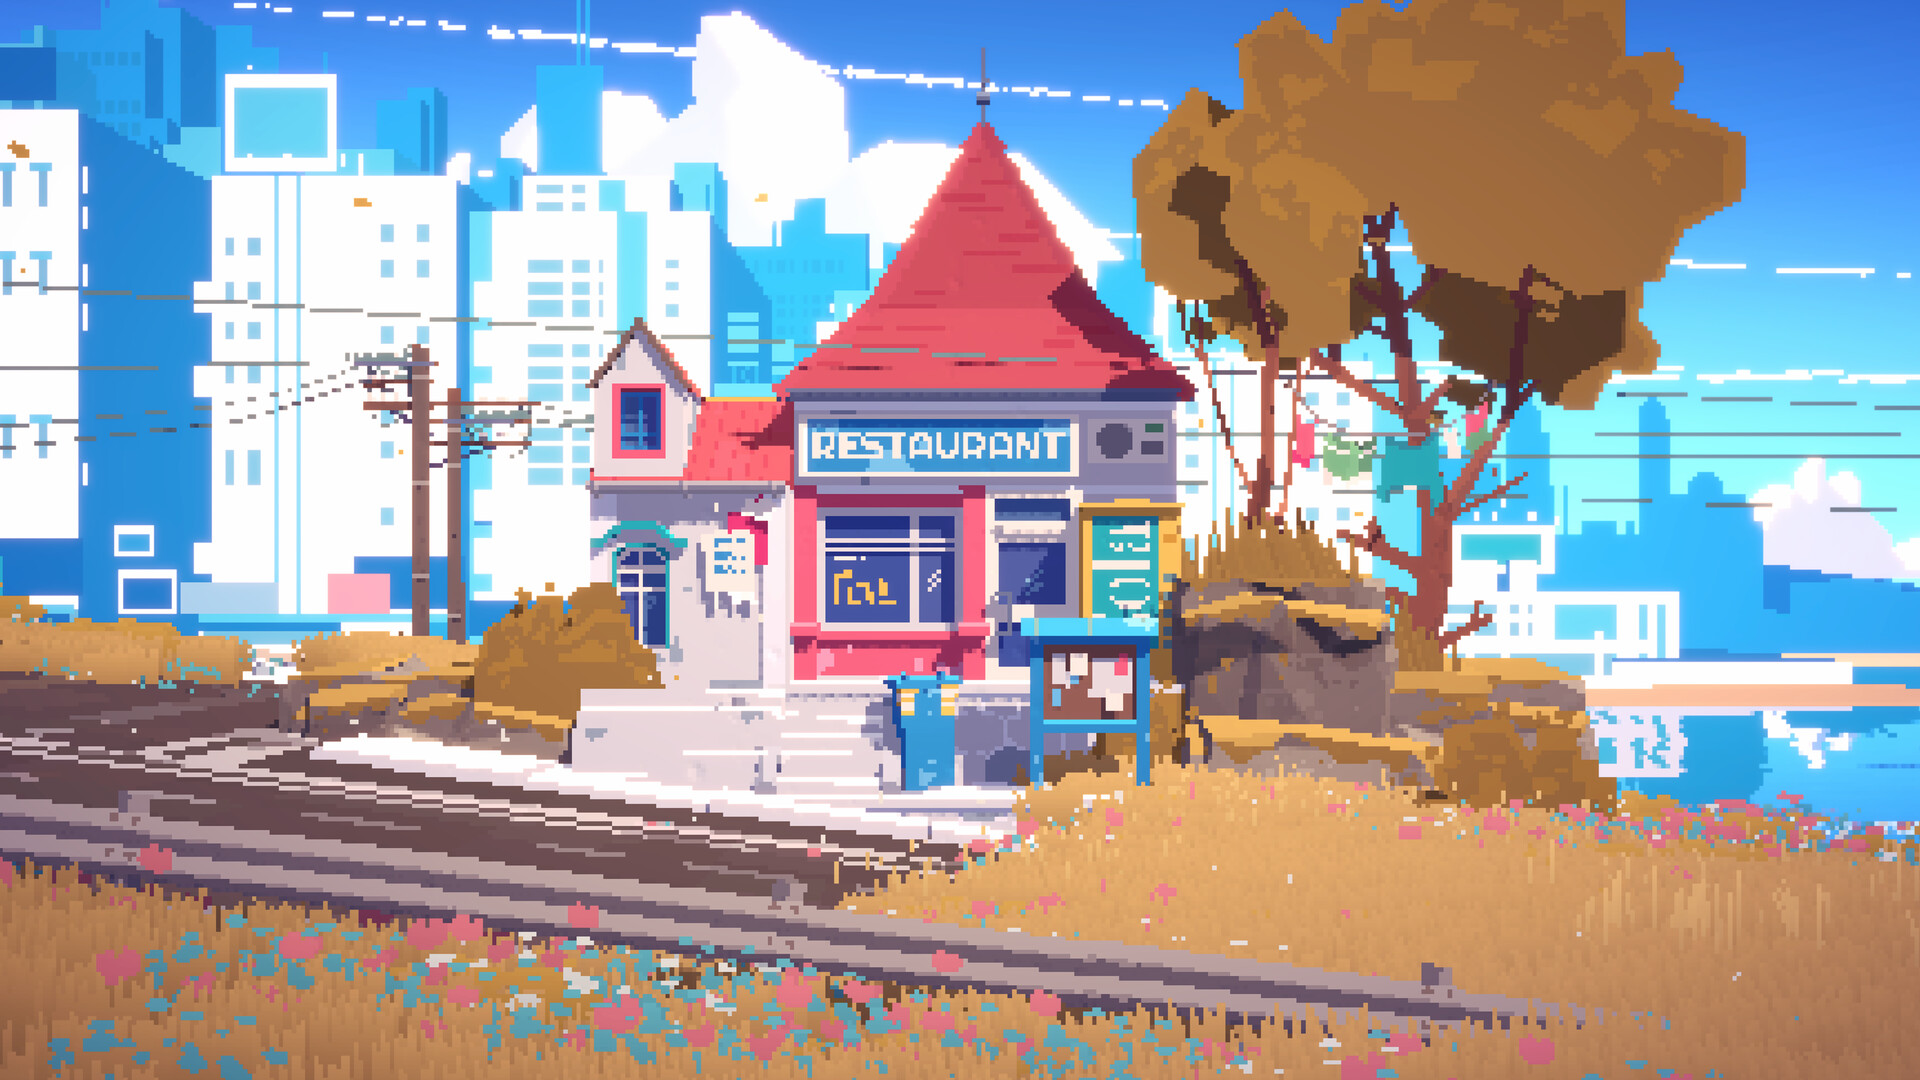 A screenshot from the game "Summerhouse:" A red and white restaurant in front of some train tracks, with trees to the right. A blue sign that reads "Restaurant" is on the front of the building